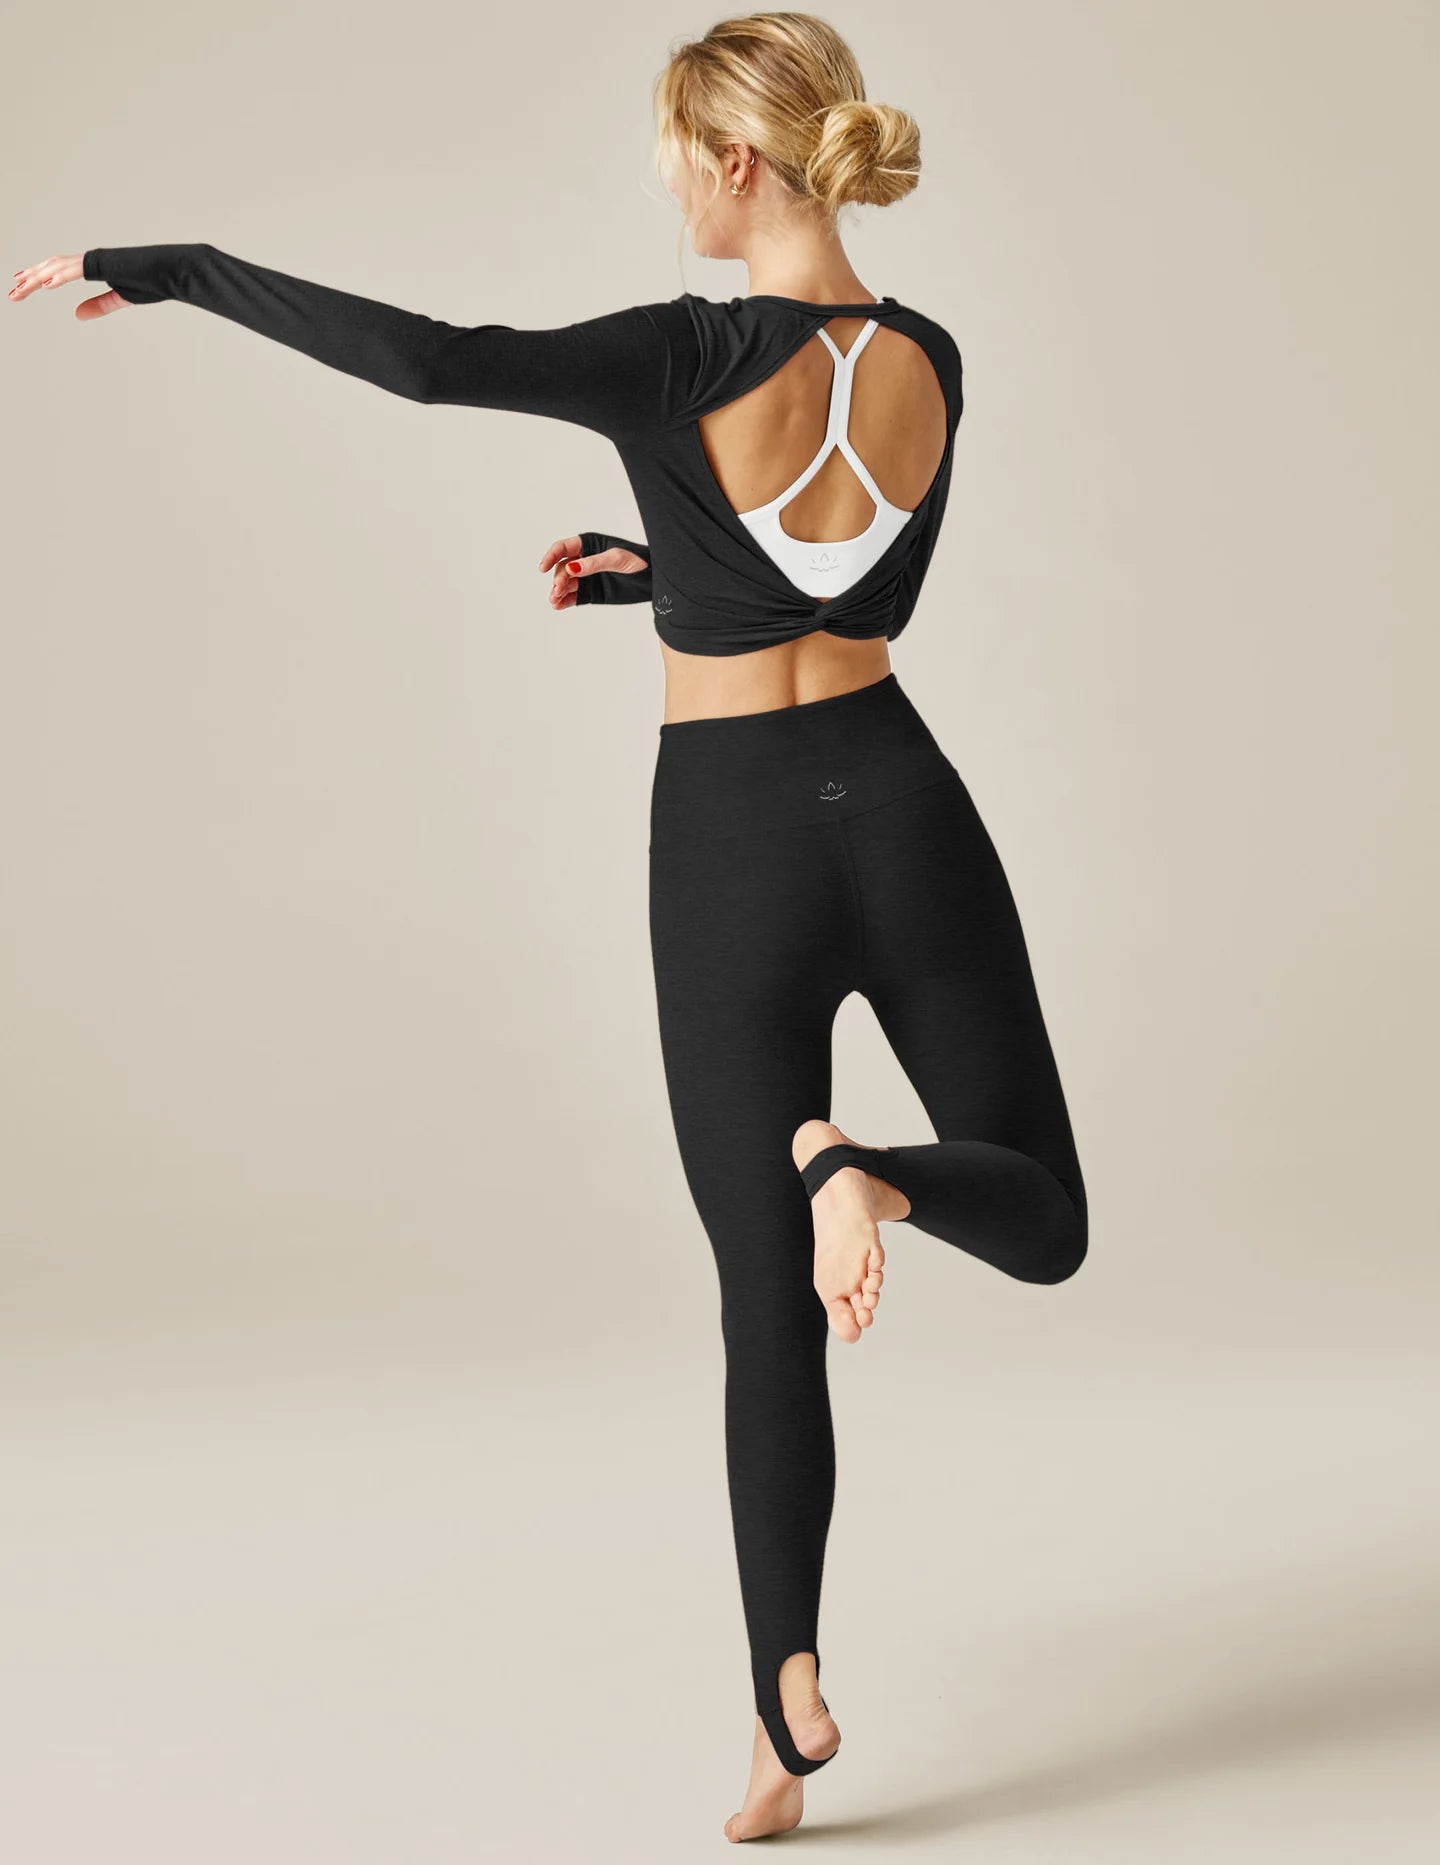 Beyond Yoga Spacedye Out Of Pocket High Waisted 7/8 Yoga Leggings at  YogaOutlet.com - Free Shipping –